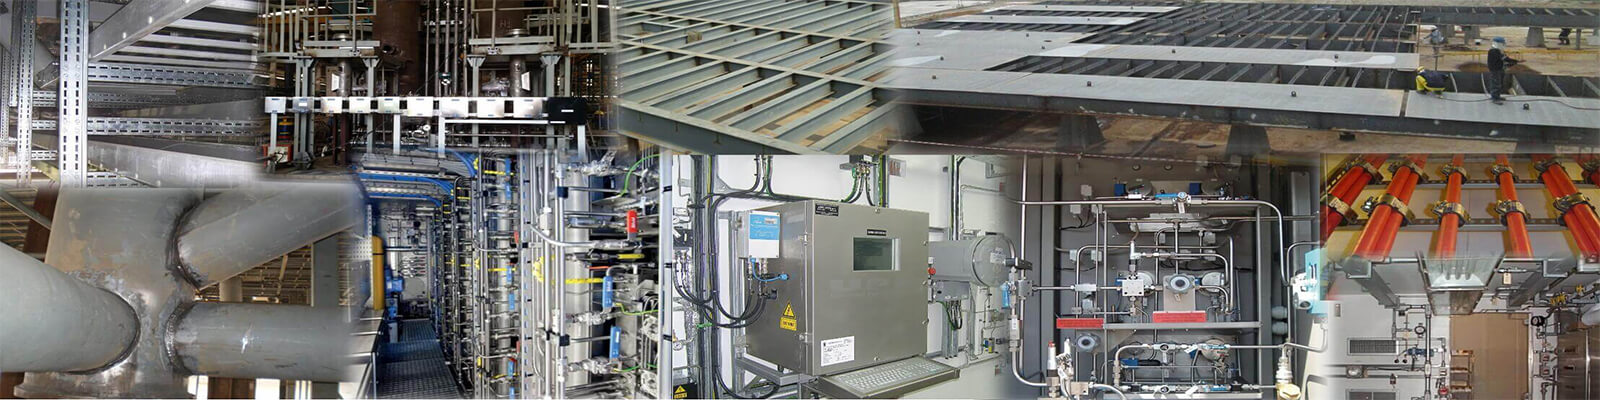 chemical injection skid singapore